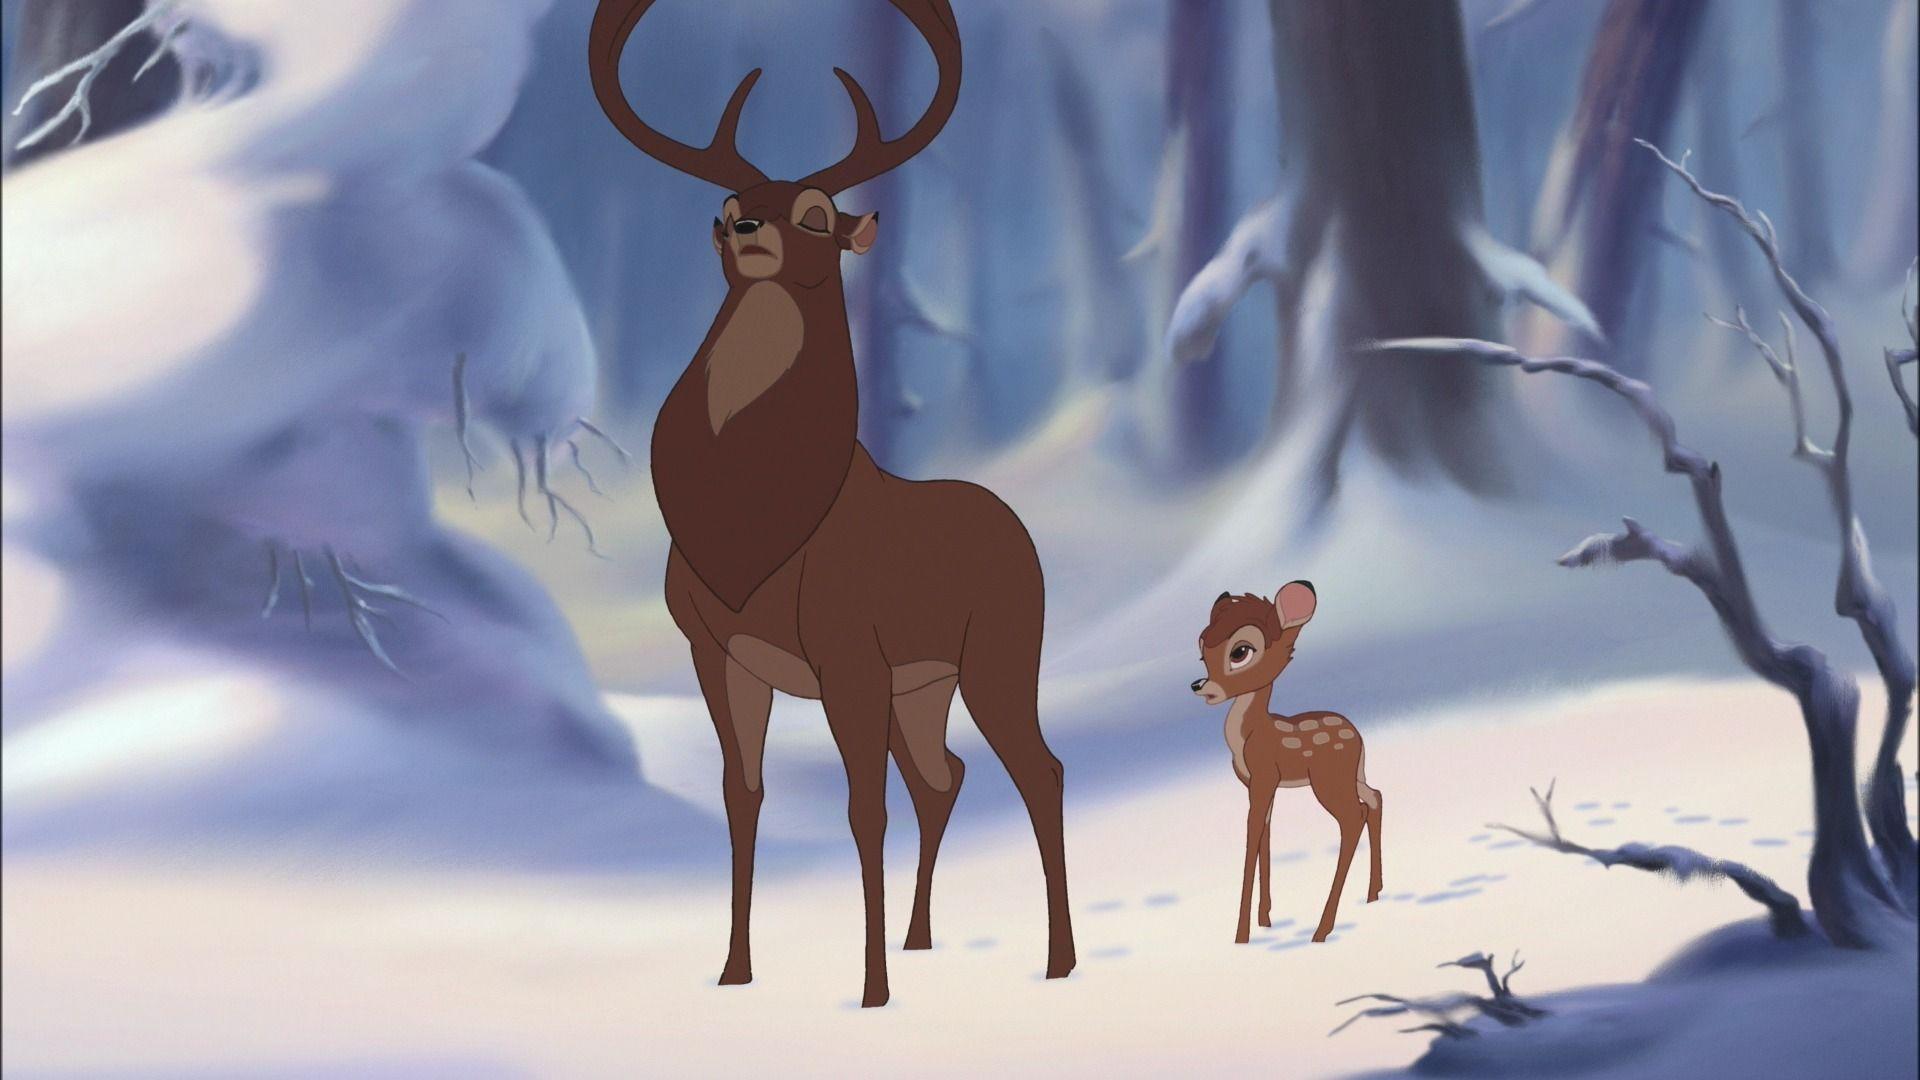 Bambi wallpaper picture download